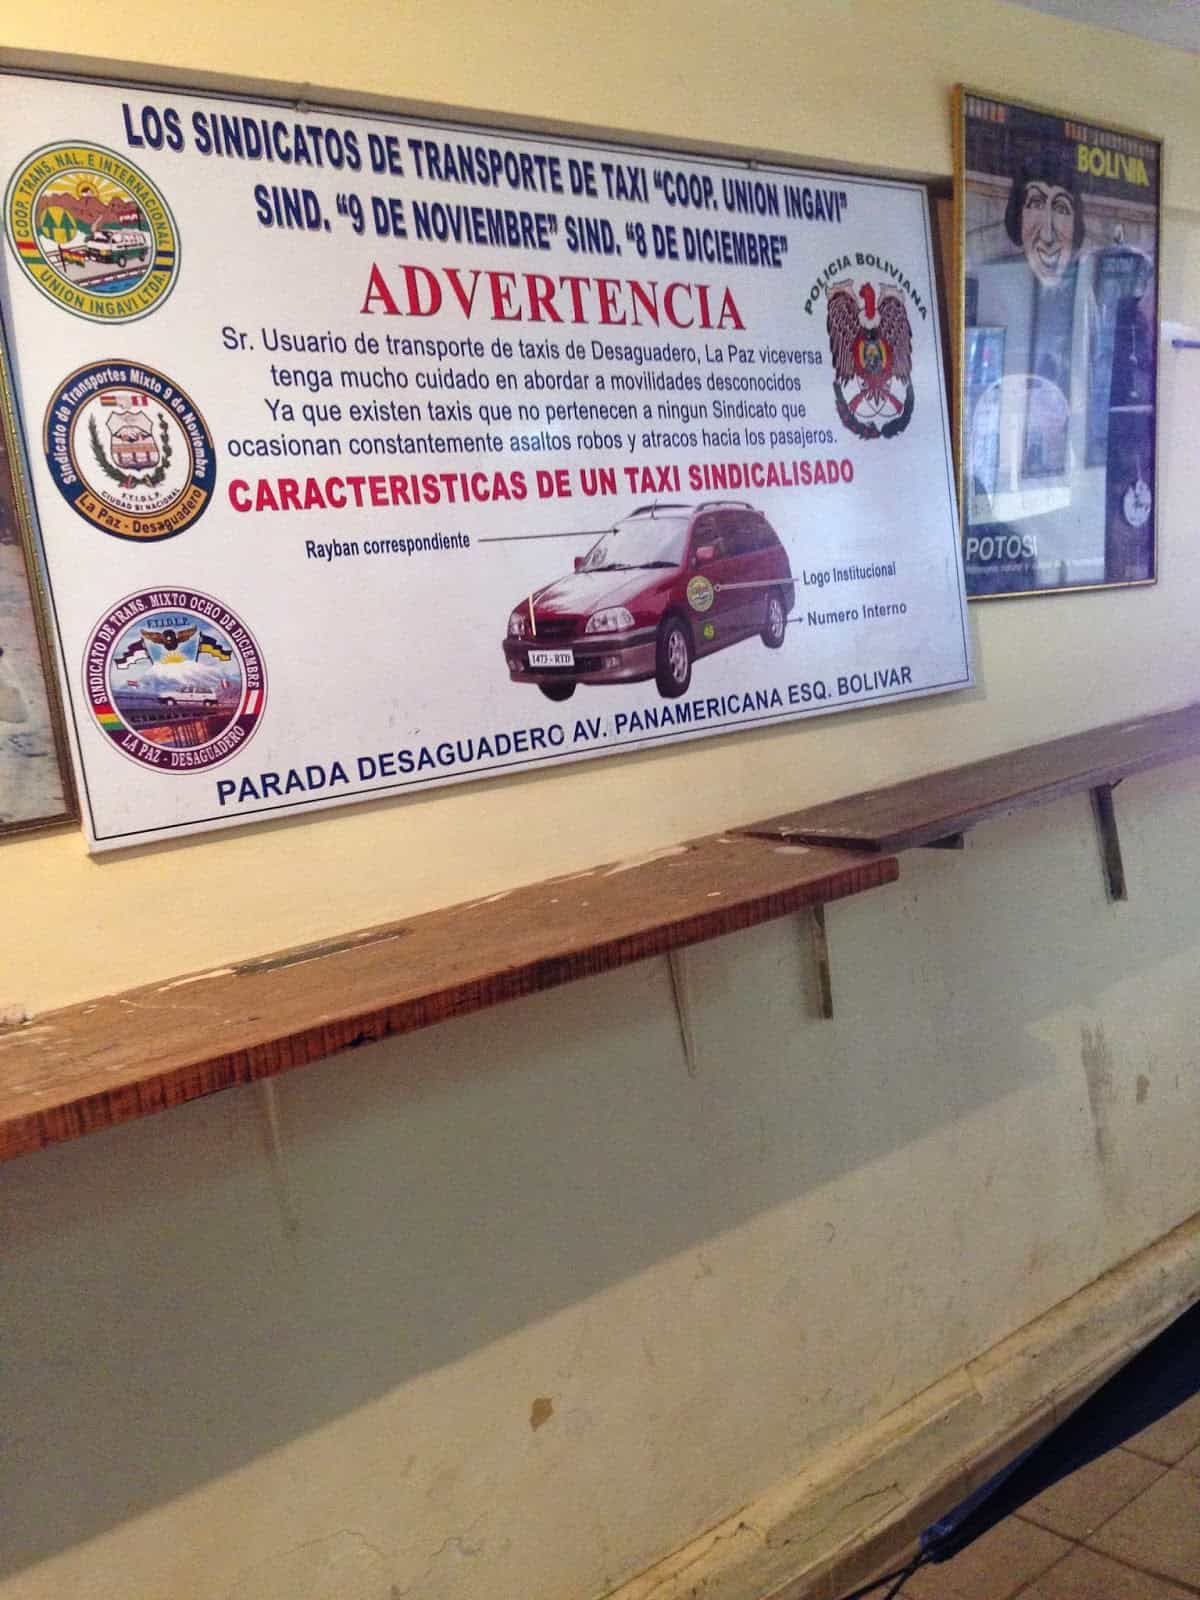 A warning about taxis at the Desaguadero border crossing, Bolivia